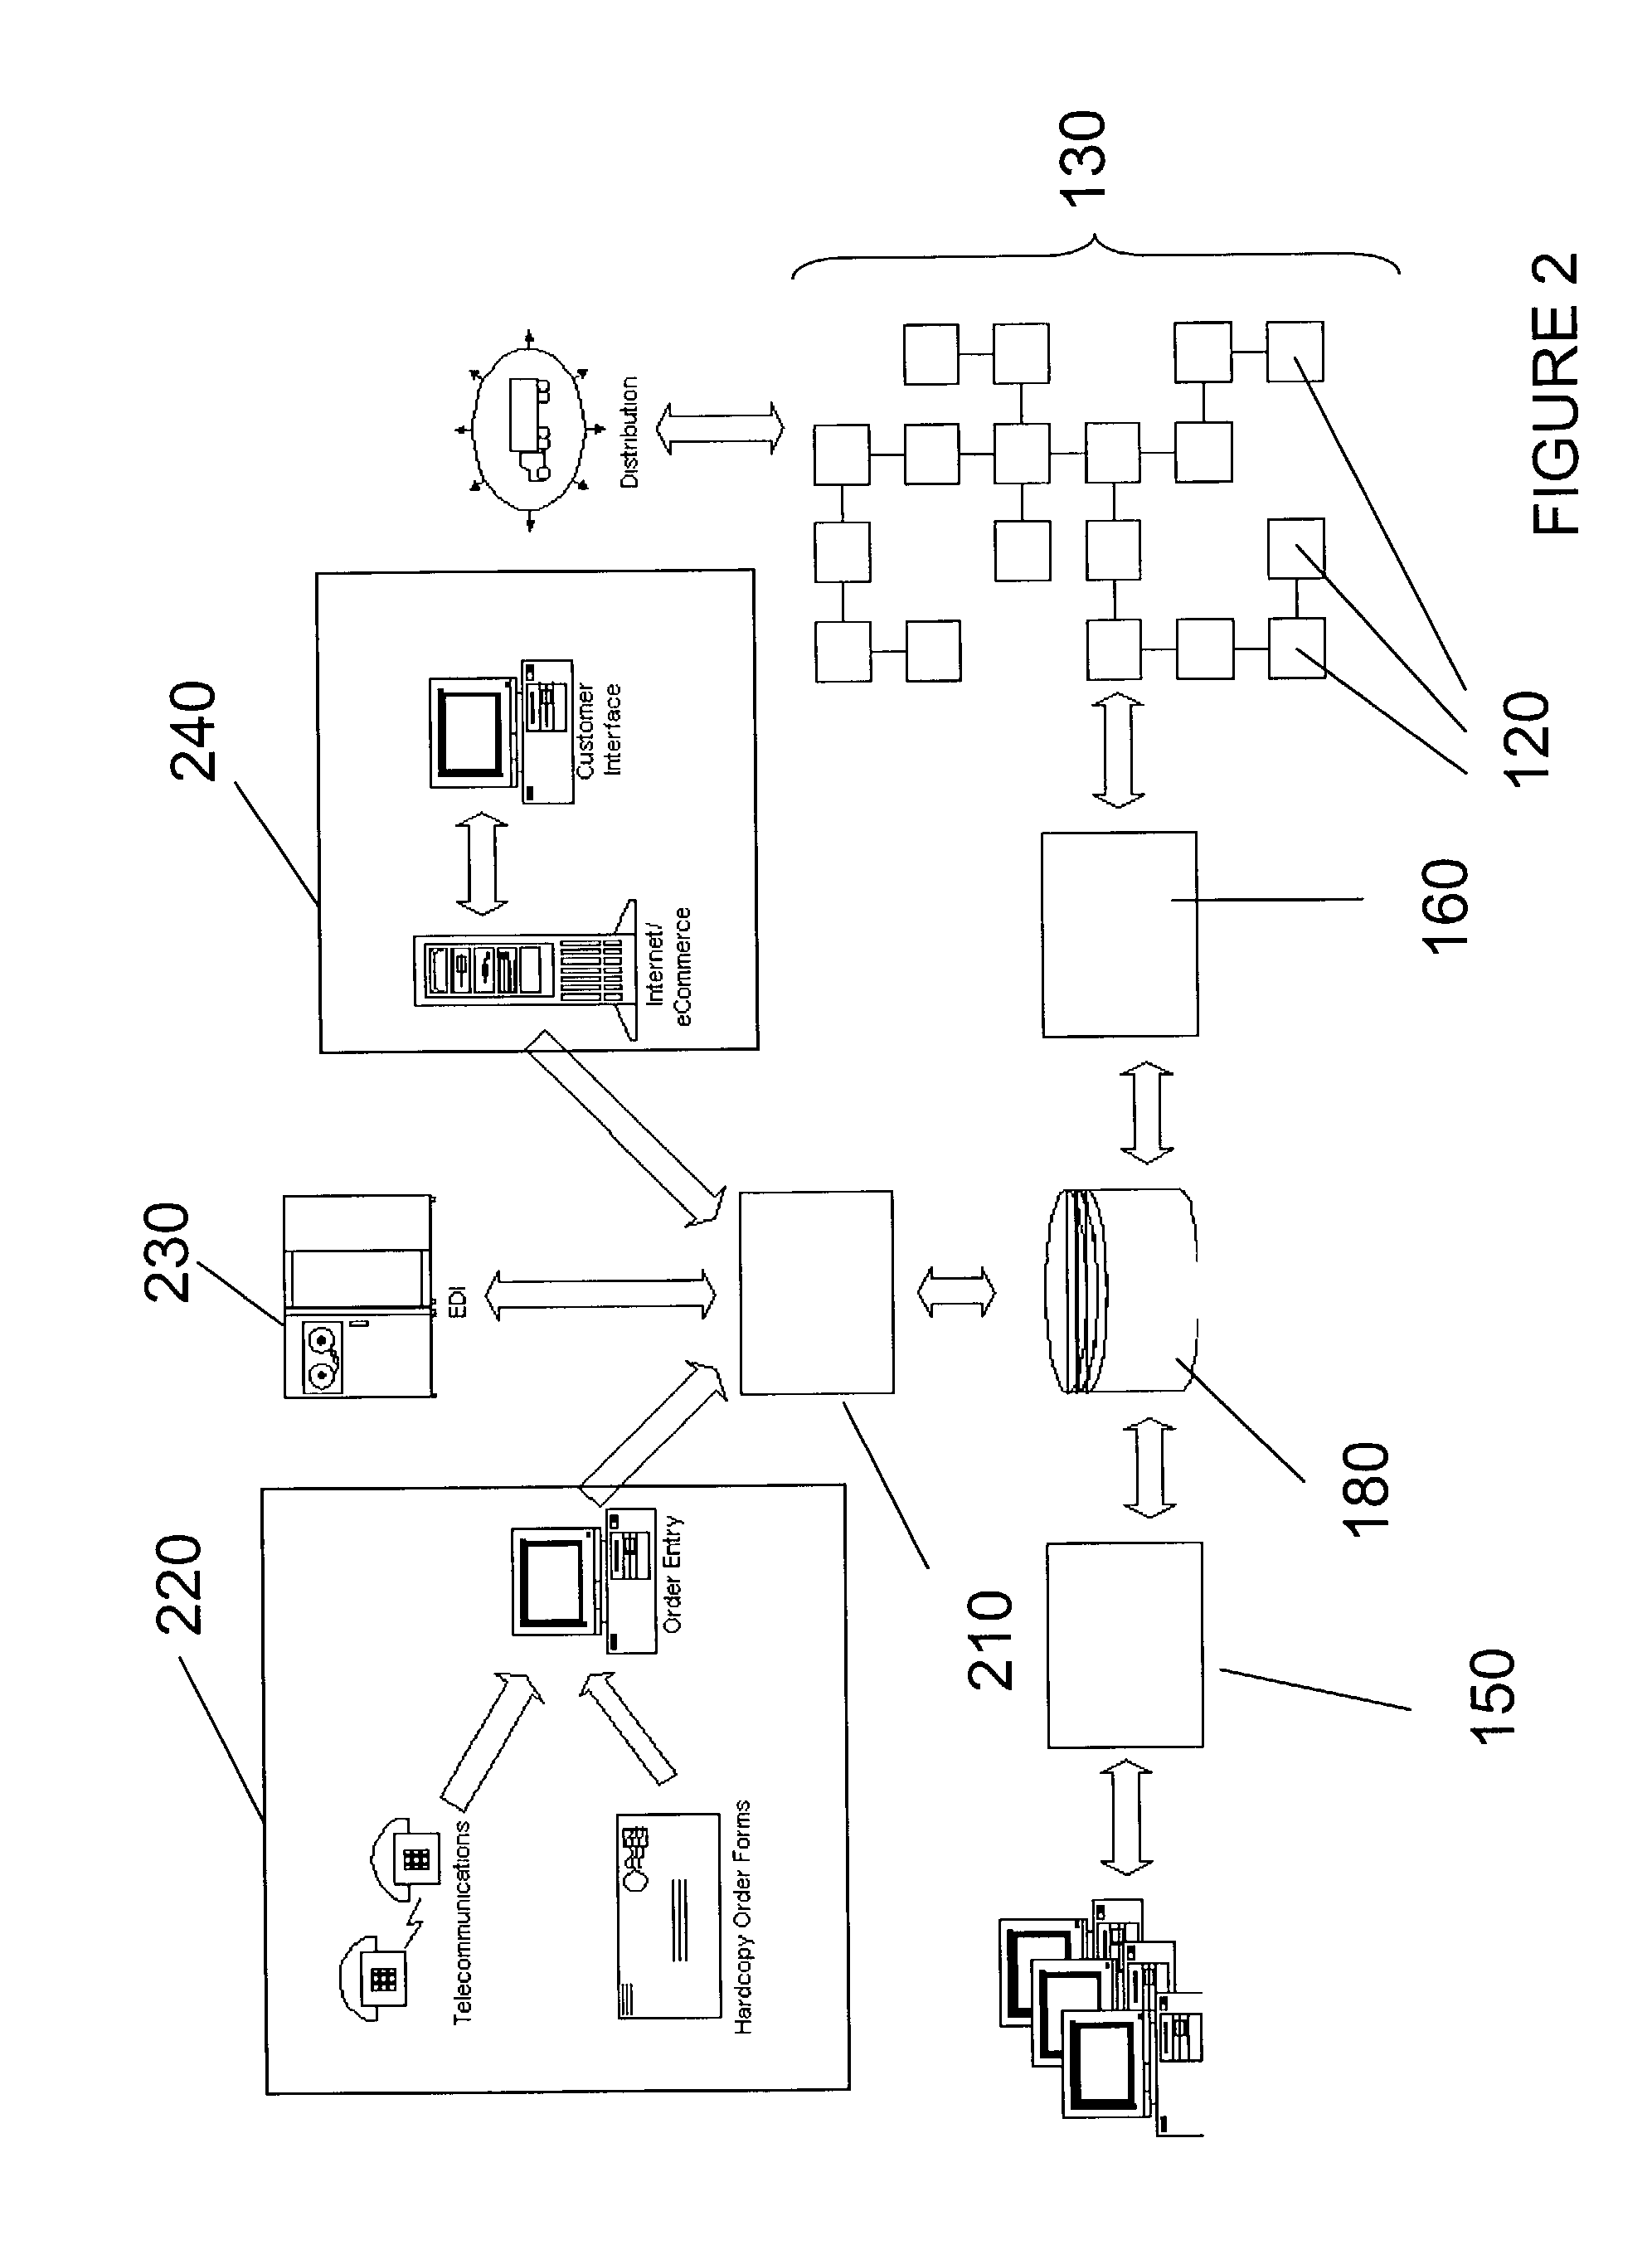 System and apparatus for materials transport and storage